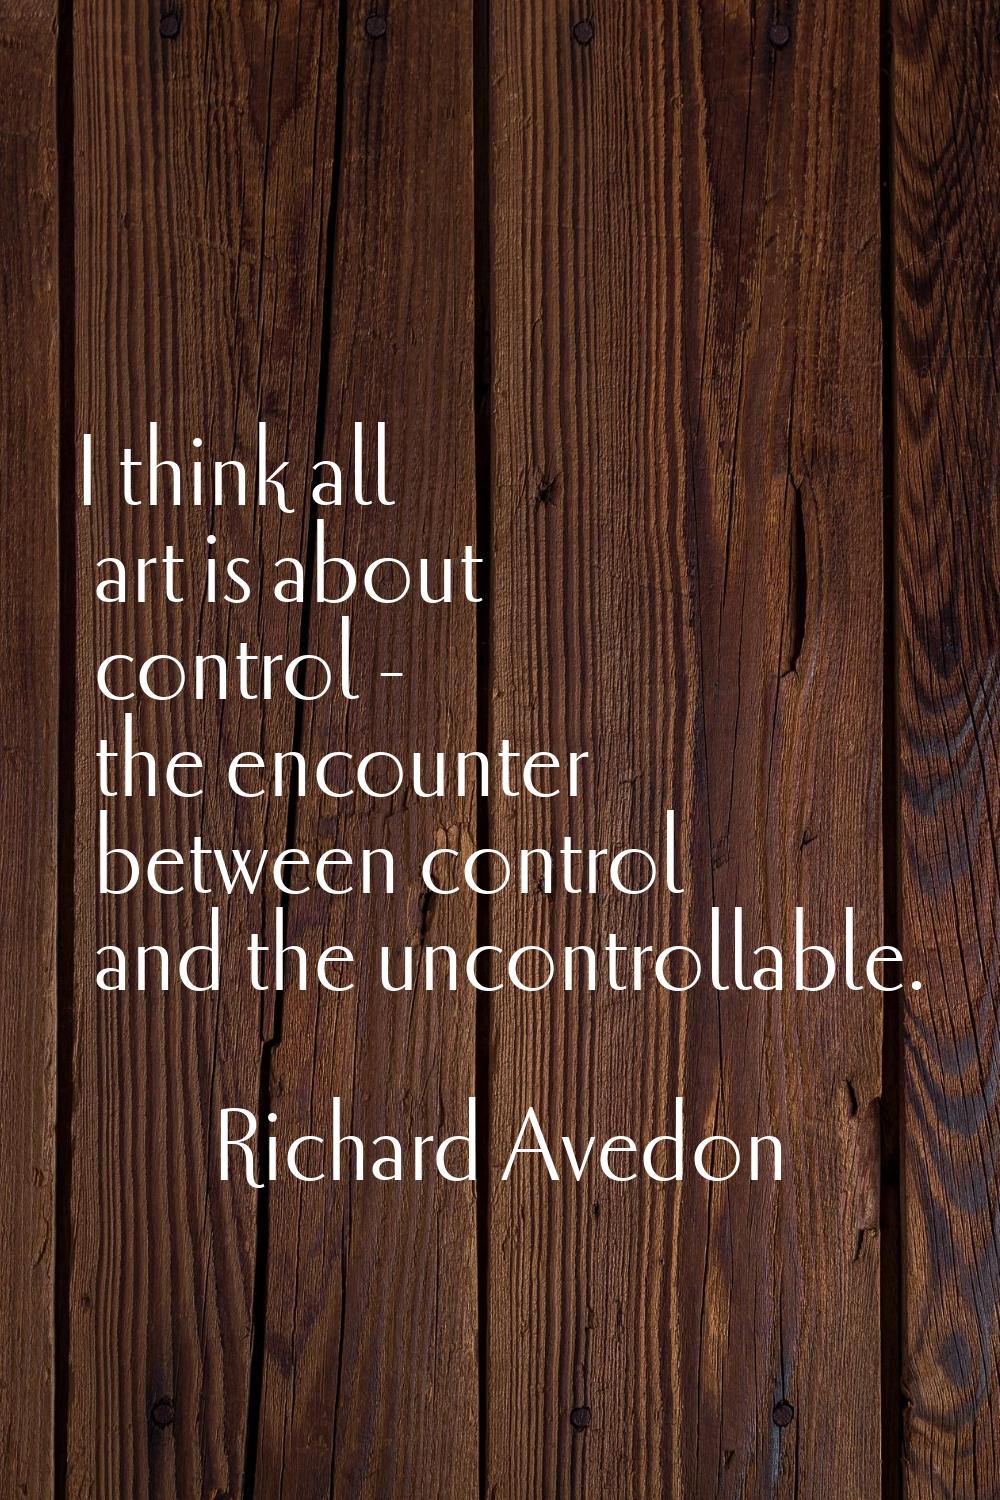 I think all art is about control - the encounter between control and the uncontrollable.